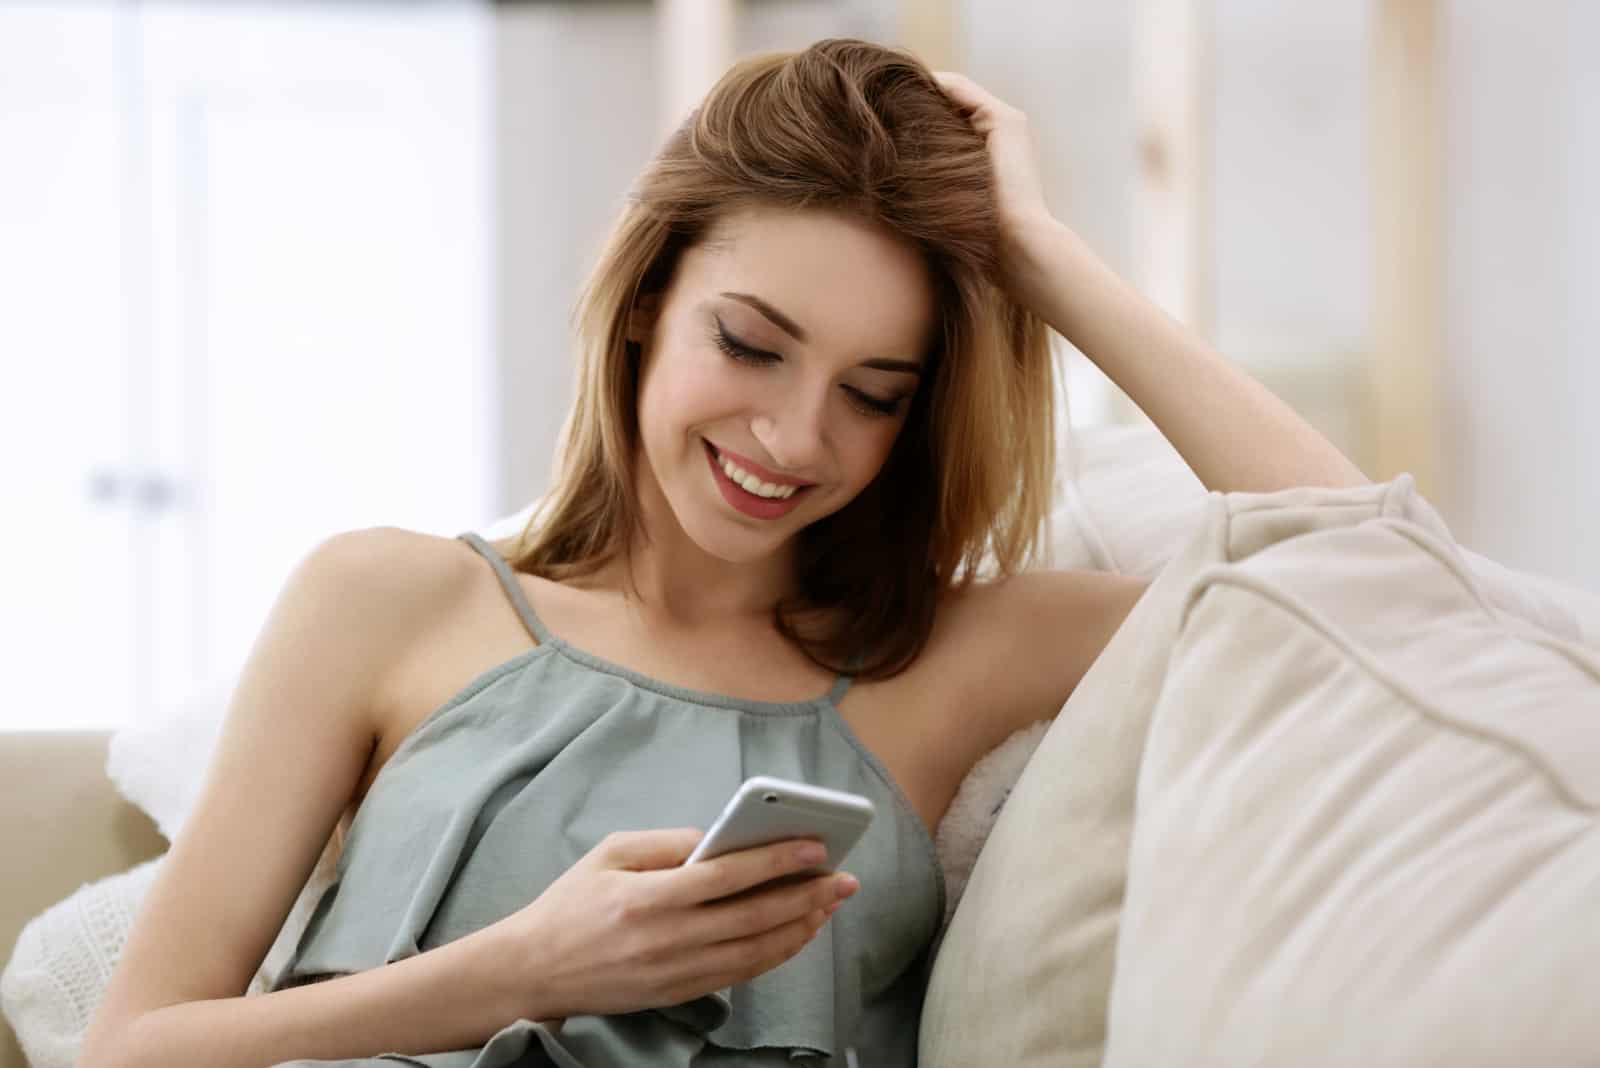 a smiling woman holding a cell phone in her hand